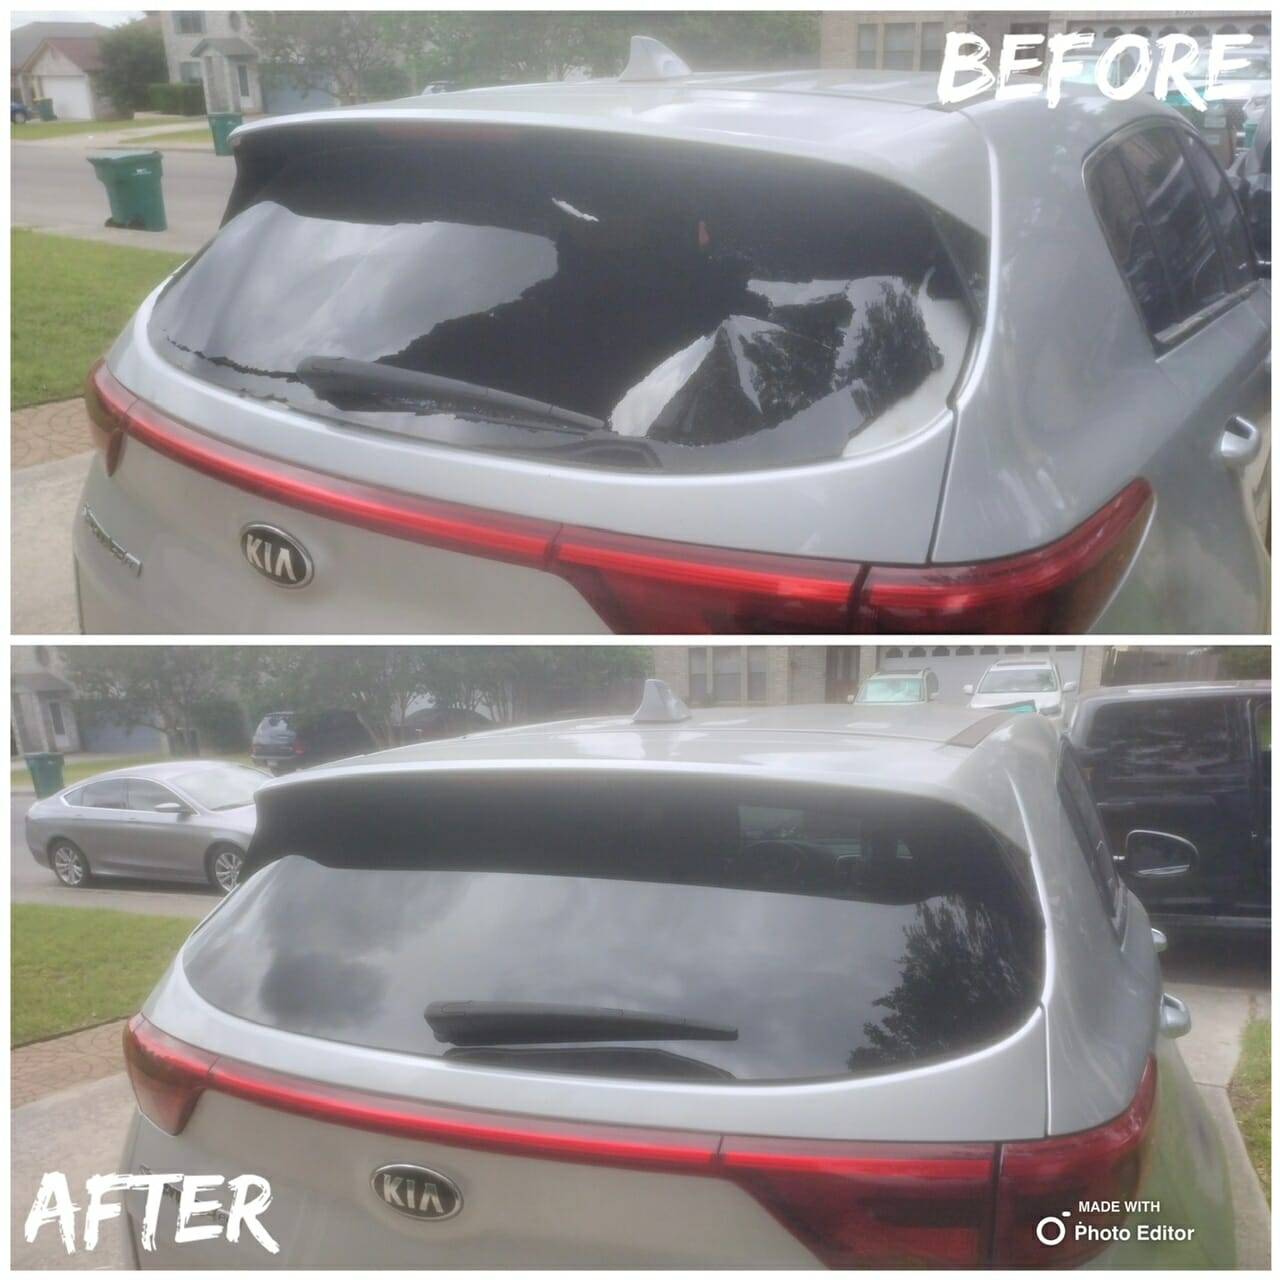 This before and after image illustrates the effective repair of an SUV's rear windshield in Von Ormy, Texas. The top half features the windshield with significant damage, as the entire center is smashed in due to vandalism. The bottom half presents the SUV after the repair, fitted with a new, clear, and intact back glass, highlighting the quality of our windshield replacement service. 